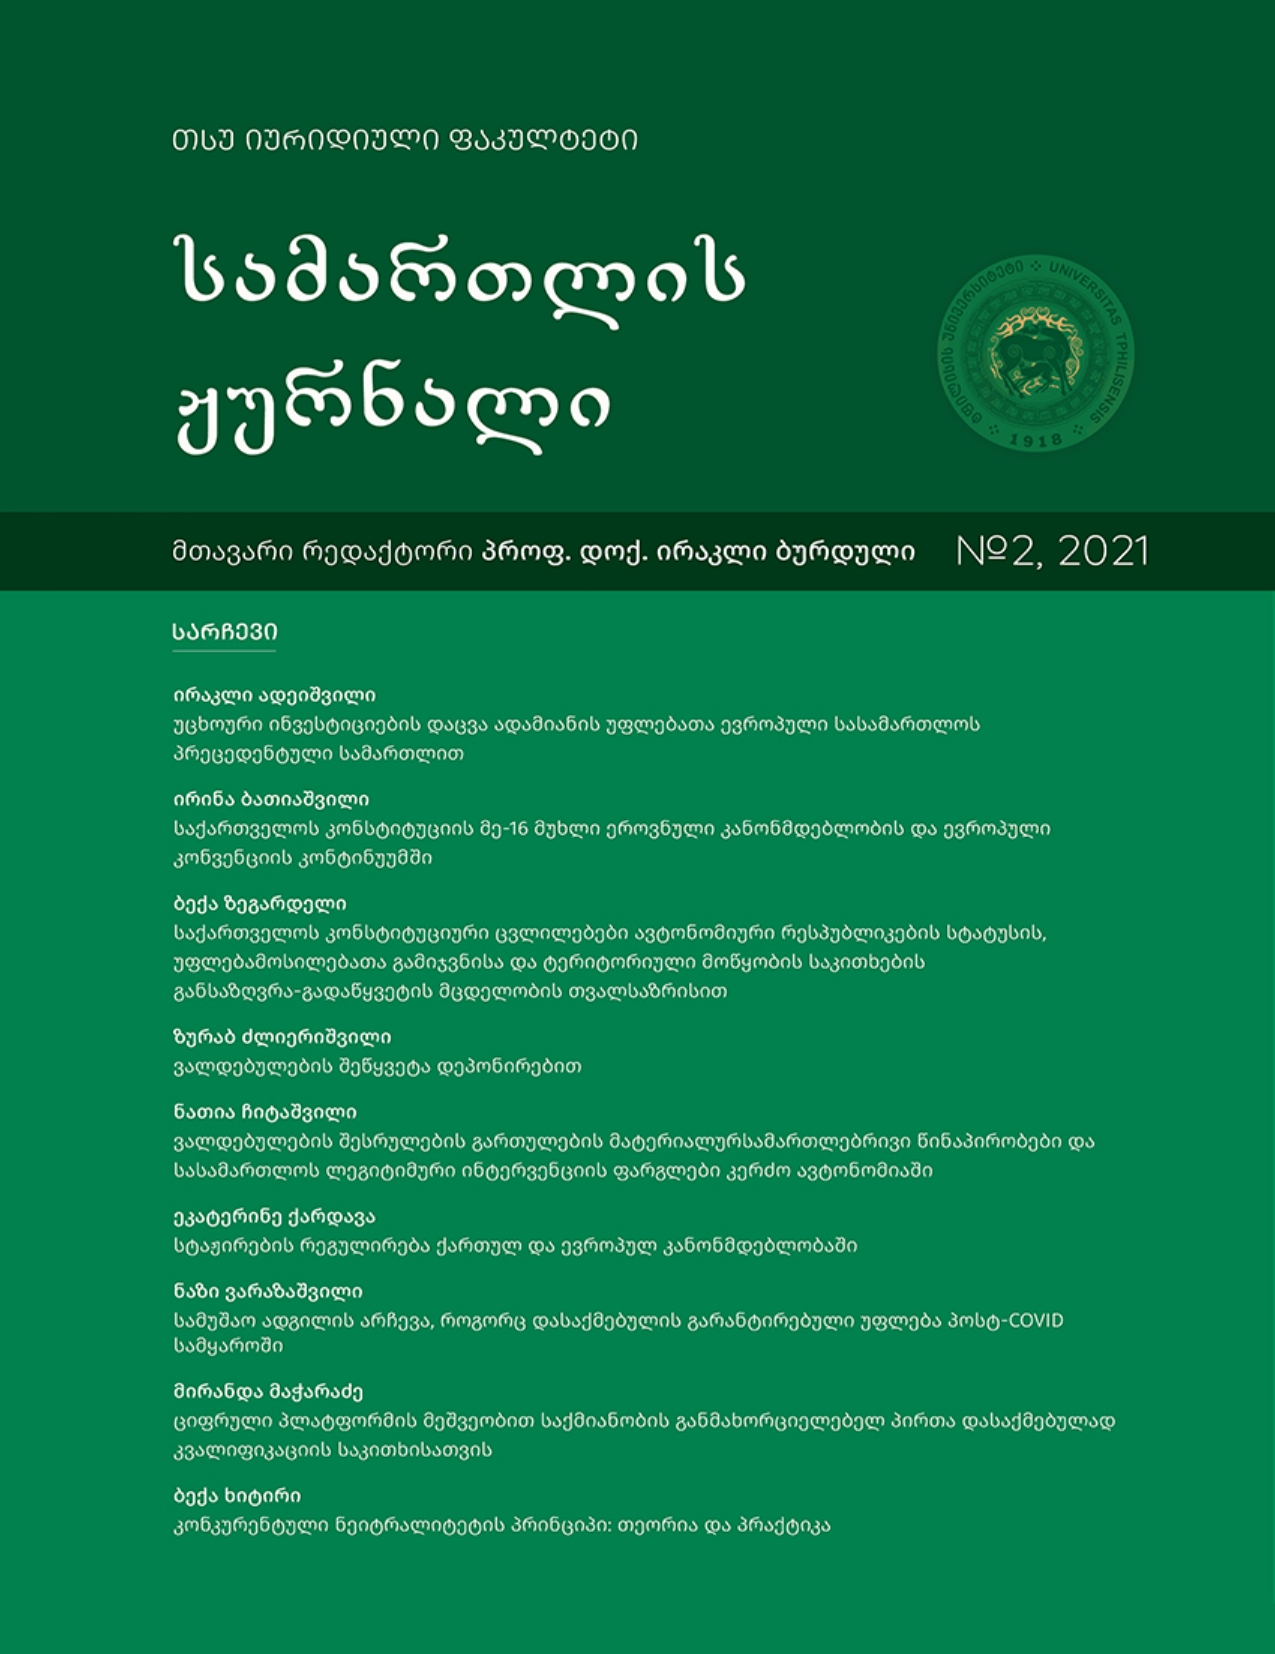 Journal of Law